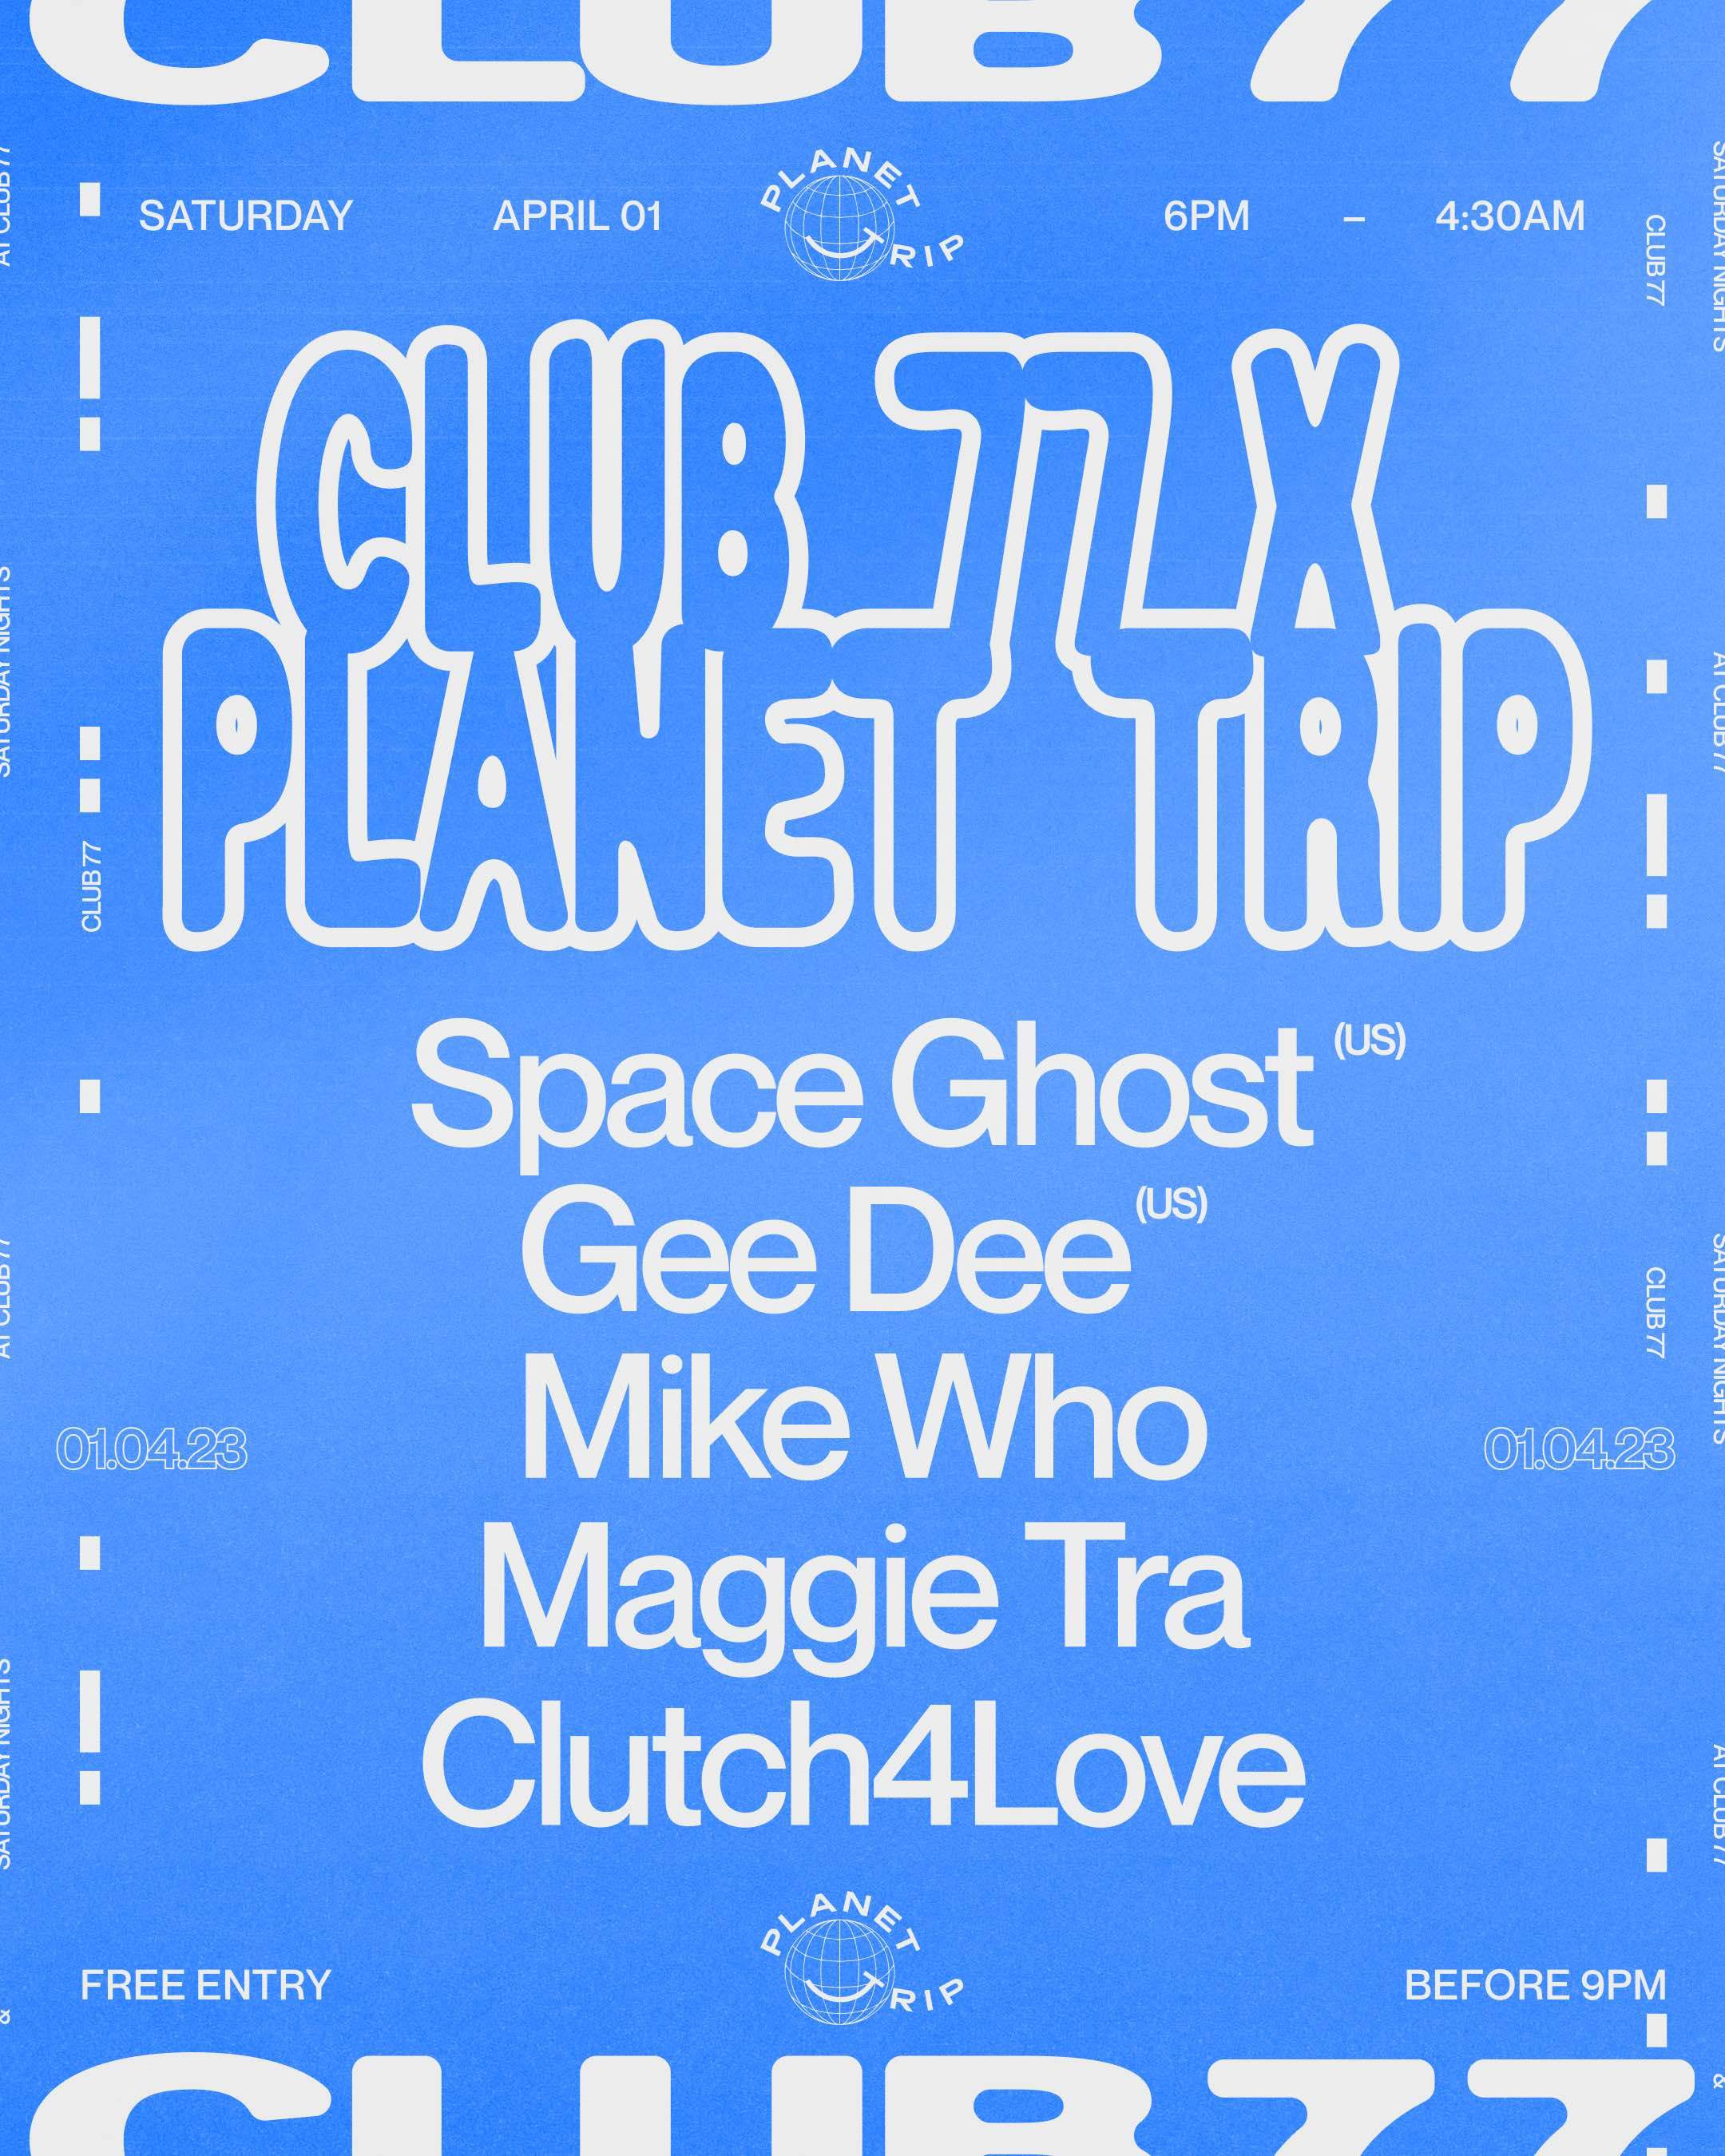 Space Ghost, Gee Dee & Mike Who - フライヤー表